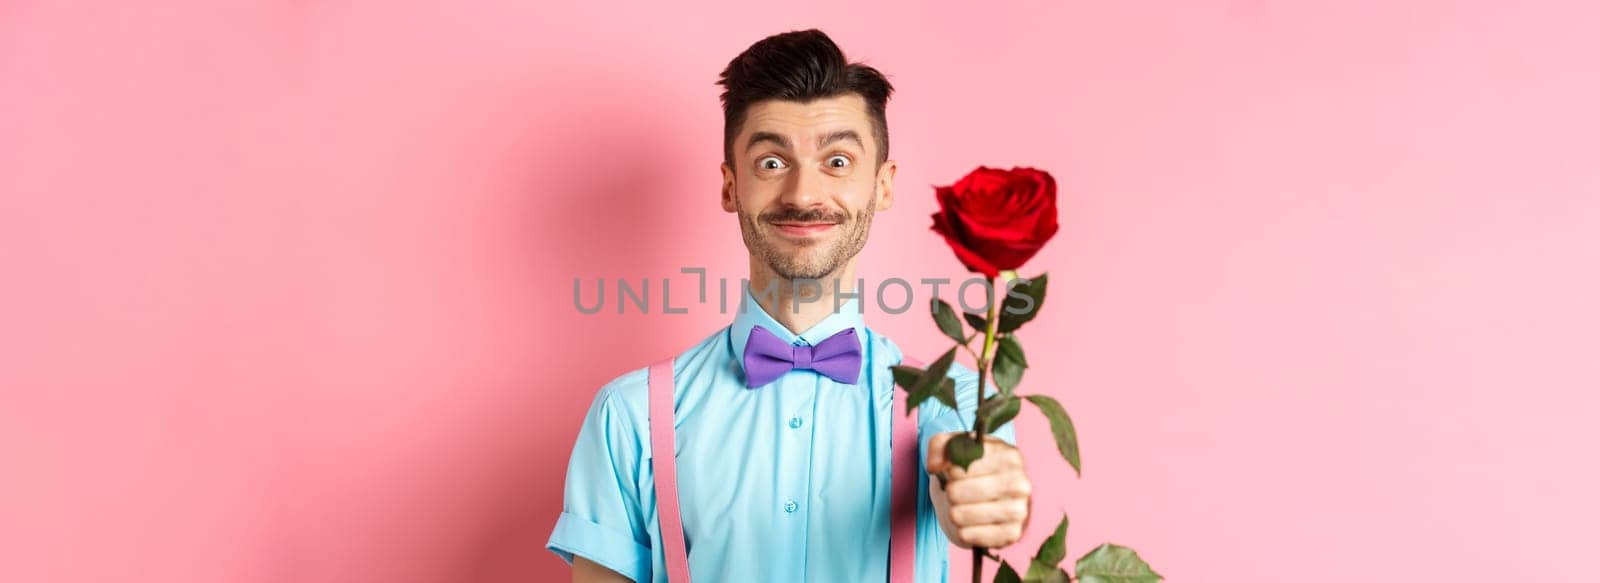 Valentines day and romance concept. Funny guy with moustache giving red rose and smiling, making romantic gesture on date, standing over pink background by Benzoix